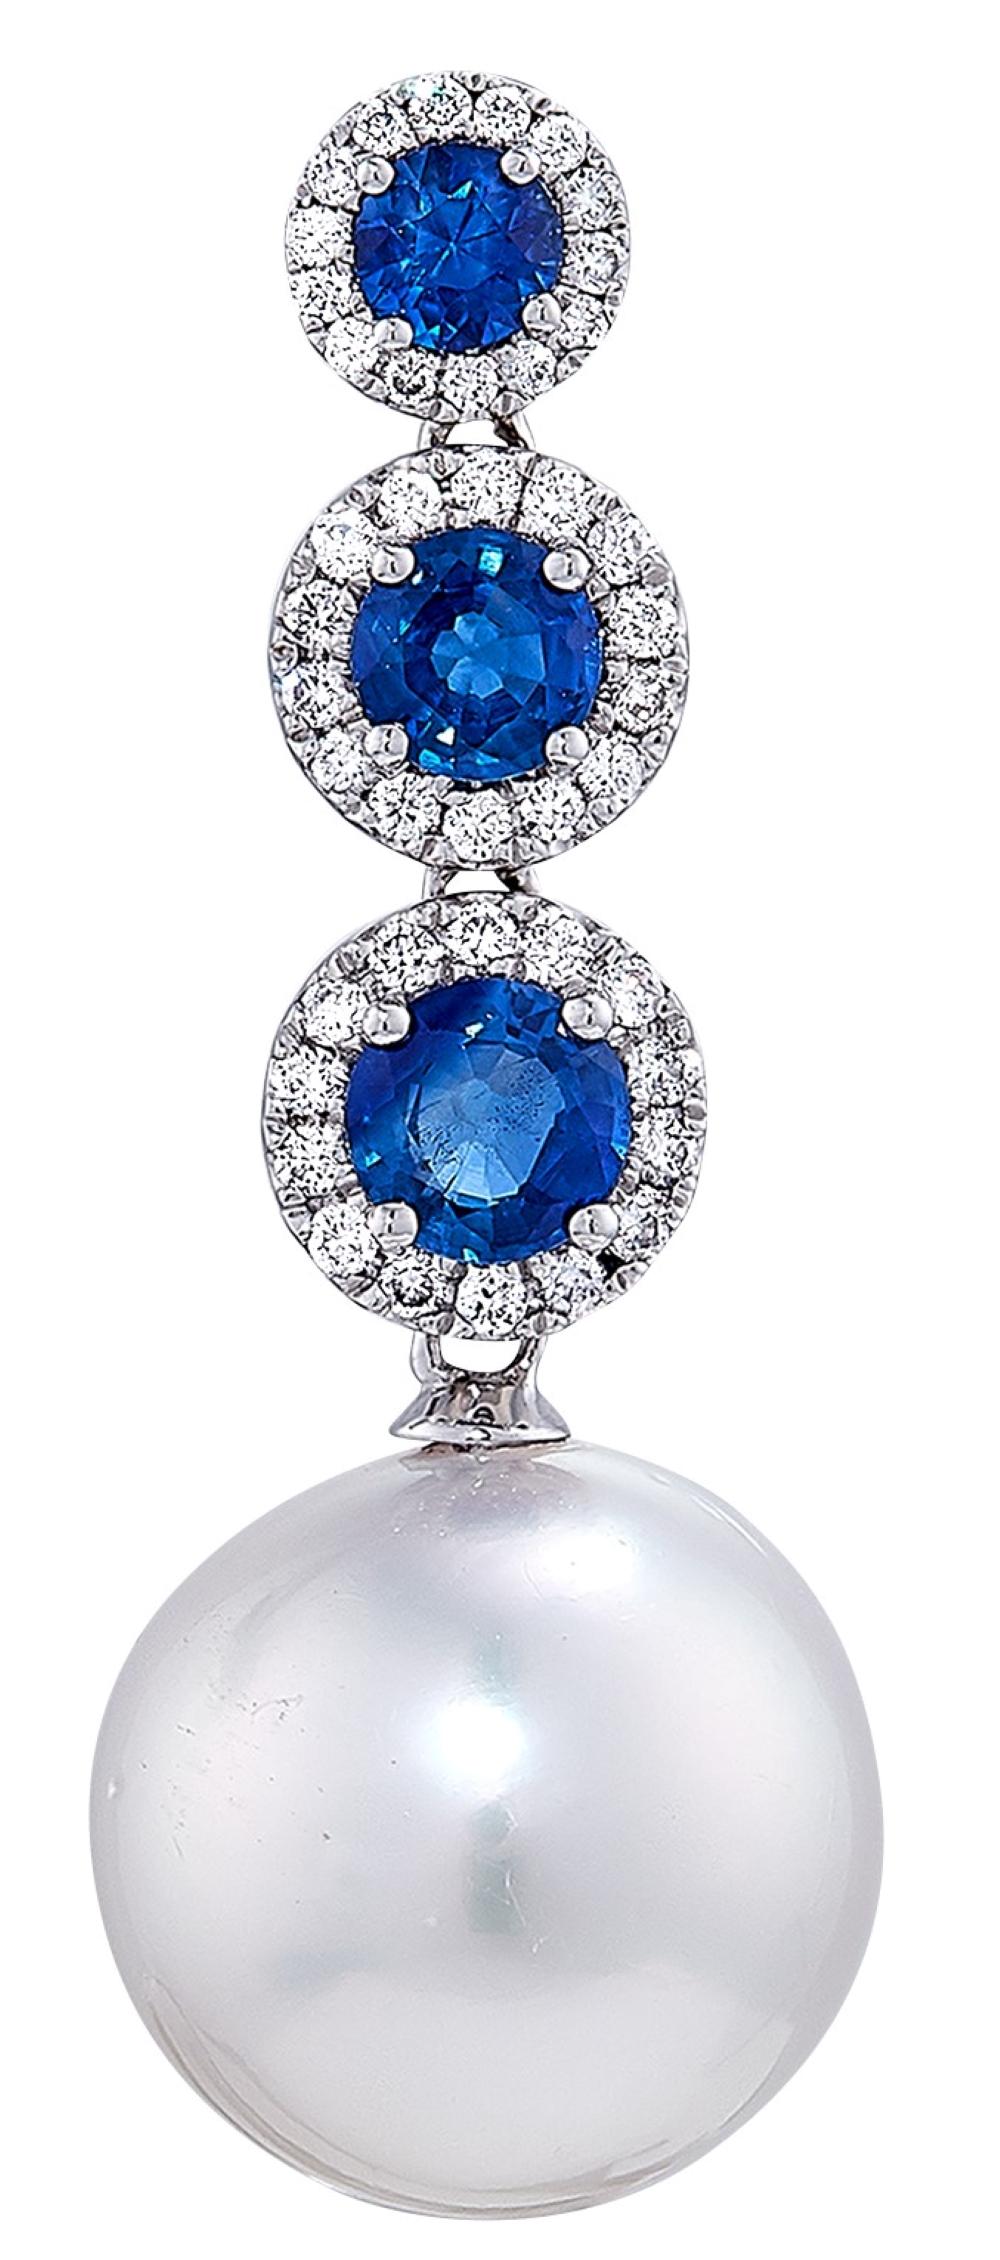 Exquisite drop style South Sea pearl, diamond, and sapphire earrings. Set to sway in the ear, these can't help but be noticed. 

Six round sapphires total 1.50 carats total weight. There are eighty-two round brilliant cut diamonds totaling .37